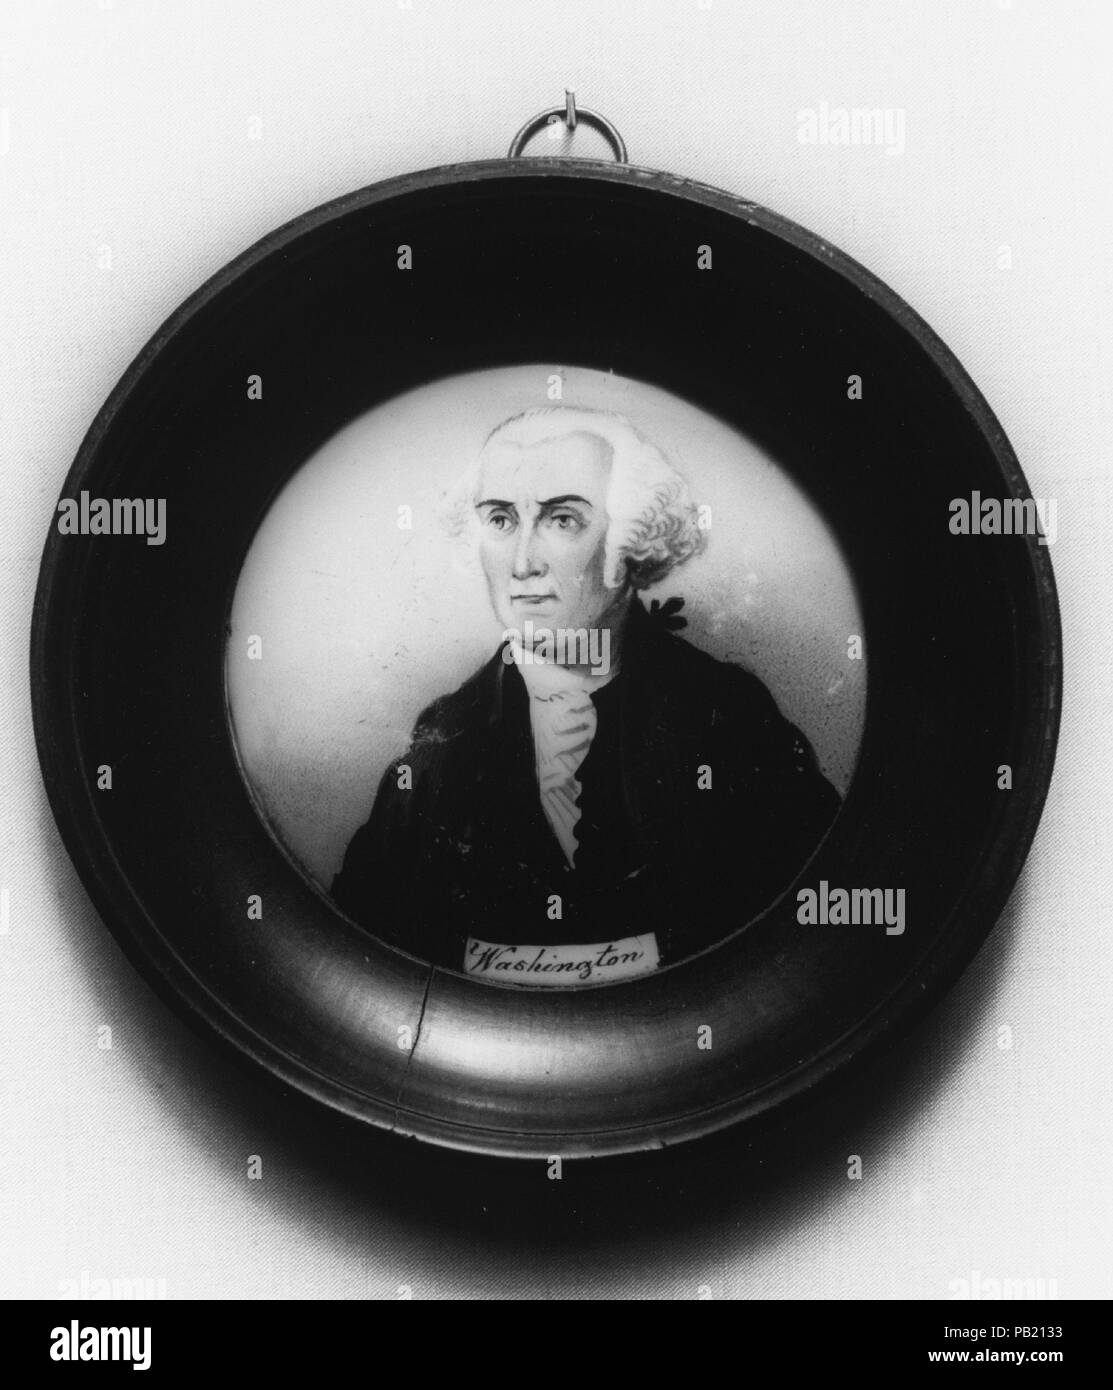 Plaque of George Washington. Culture: French. Dimensions: Diam. 2 1/2 in. (6.4 cm). Date: 1800-30. Museum: Metropolitan Museum of Art, New York, USA. Stock Photo